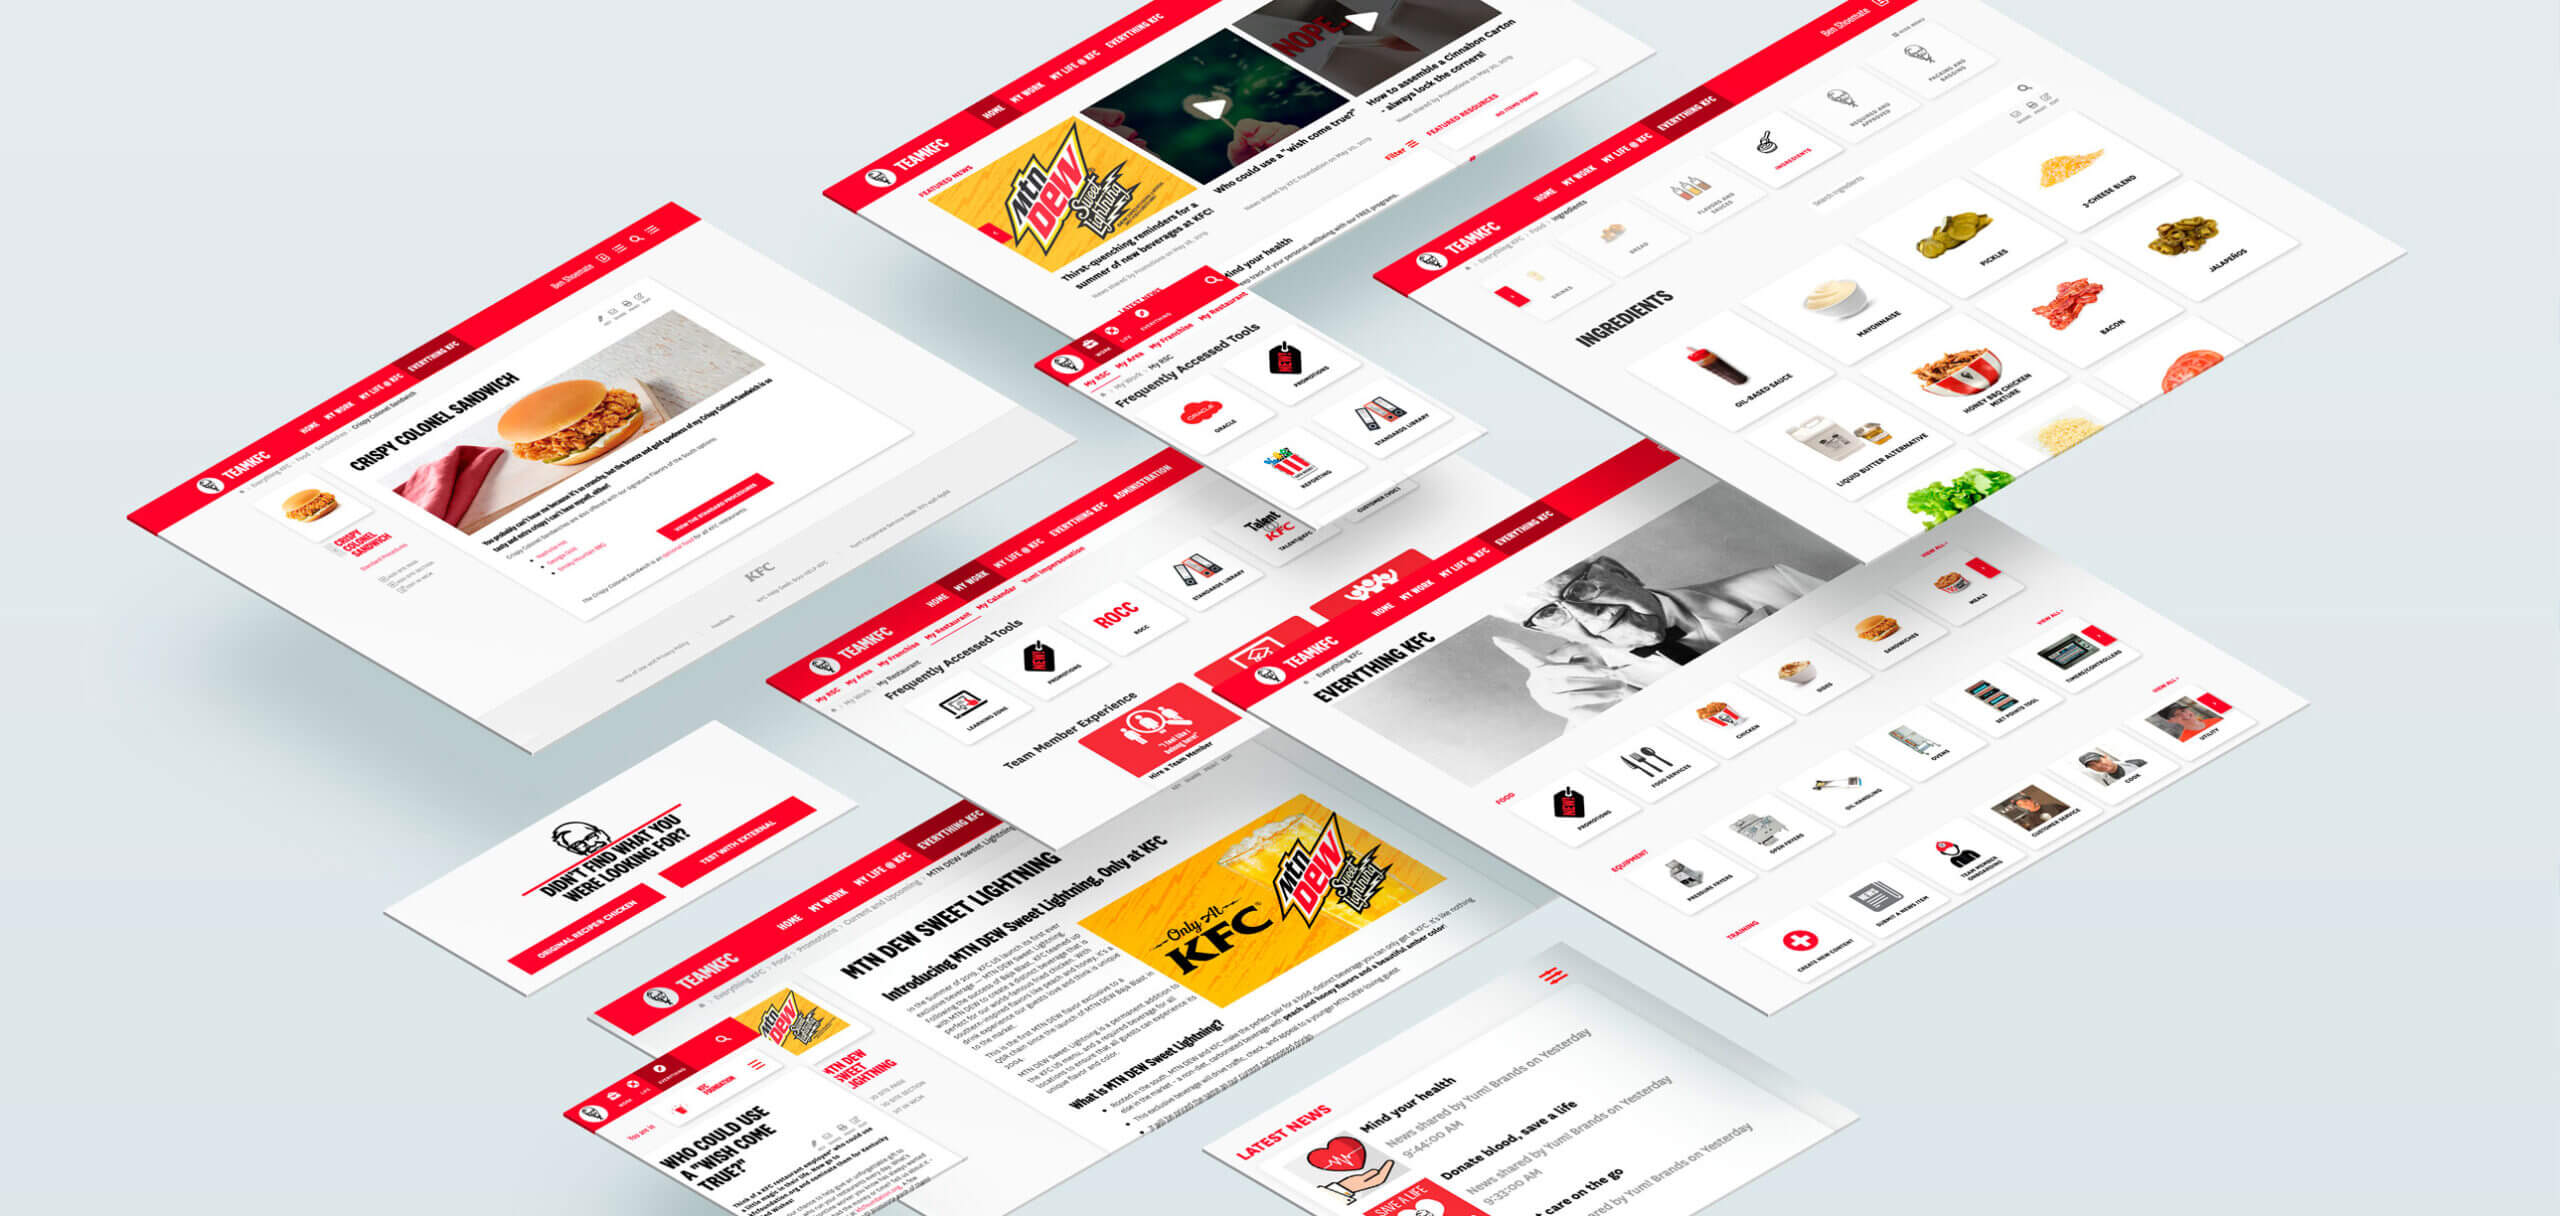 Franchisee Operations Portal for KFC